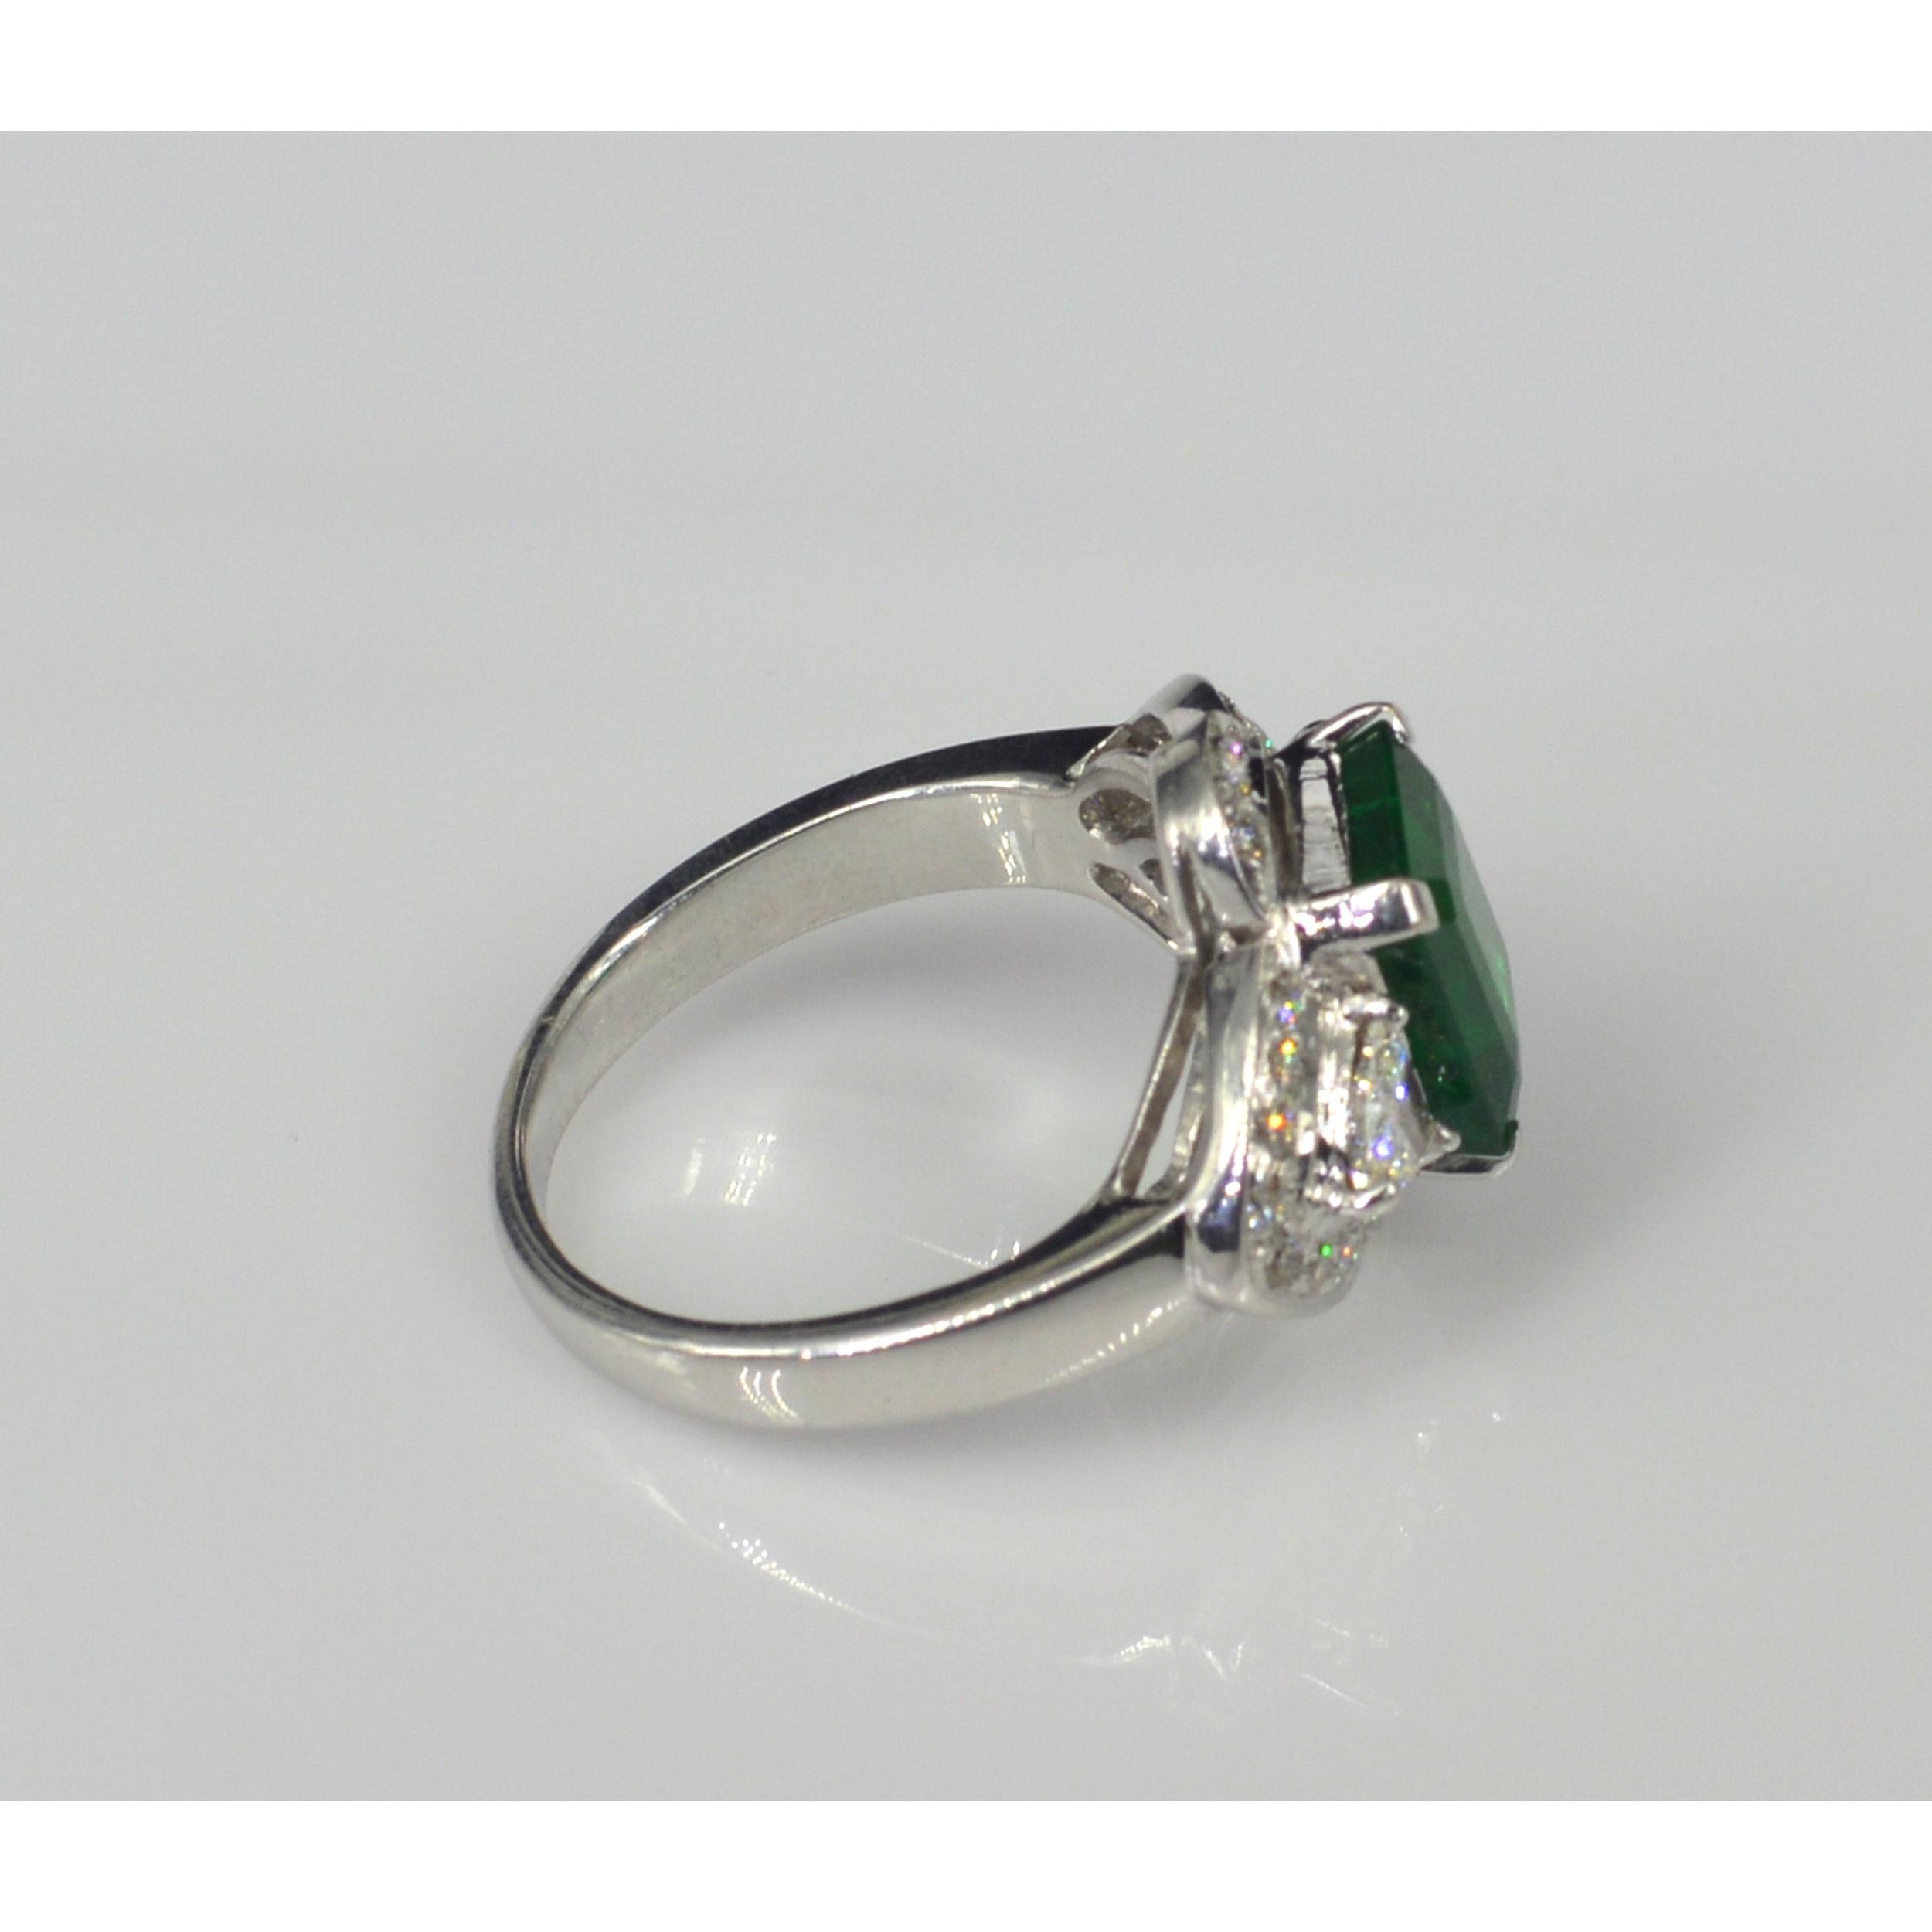 For Sale:  Antique 3 Carat Emerald Engagement Ring, Emerald Statement Ring 6